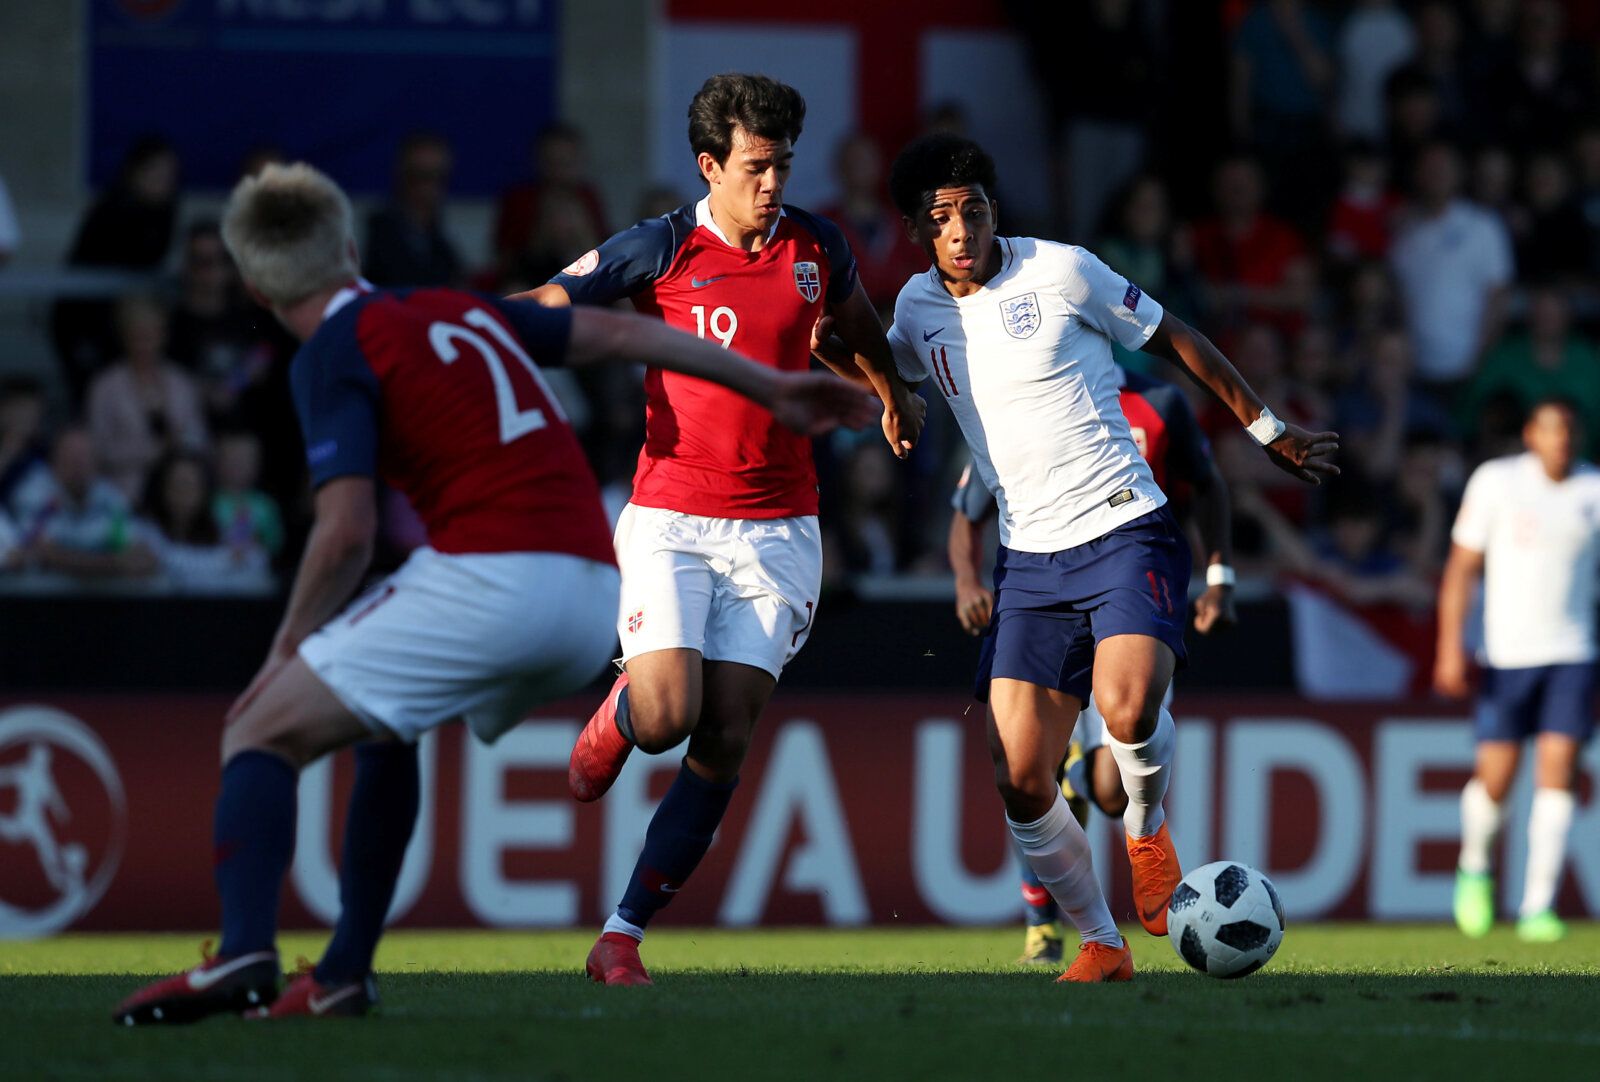 Soccer Football - UEFA European Under-17 Championship Quarter-Final - Norway vs England - Pirelli Stadium, Burton-on-Trent, Britain - May 13, 2018   England's Xavier Amaechi in action with Norway's Josef Brian Baccay   Action Images via Reuters/John Clifton